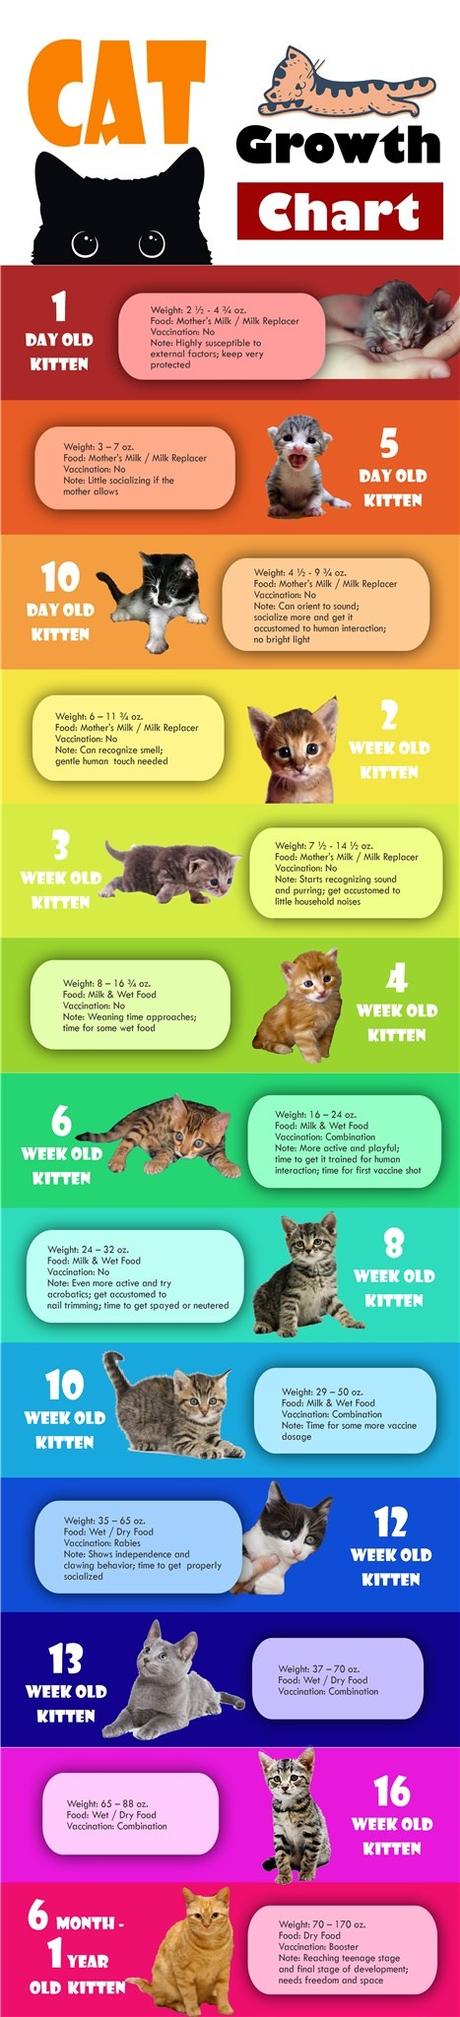 How Long Do Kittens Nurse? Should a Kitten Stay With Its Mother?